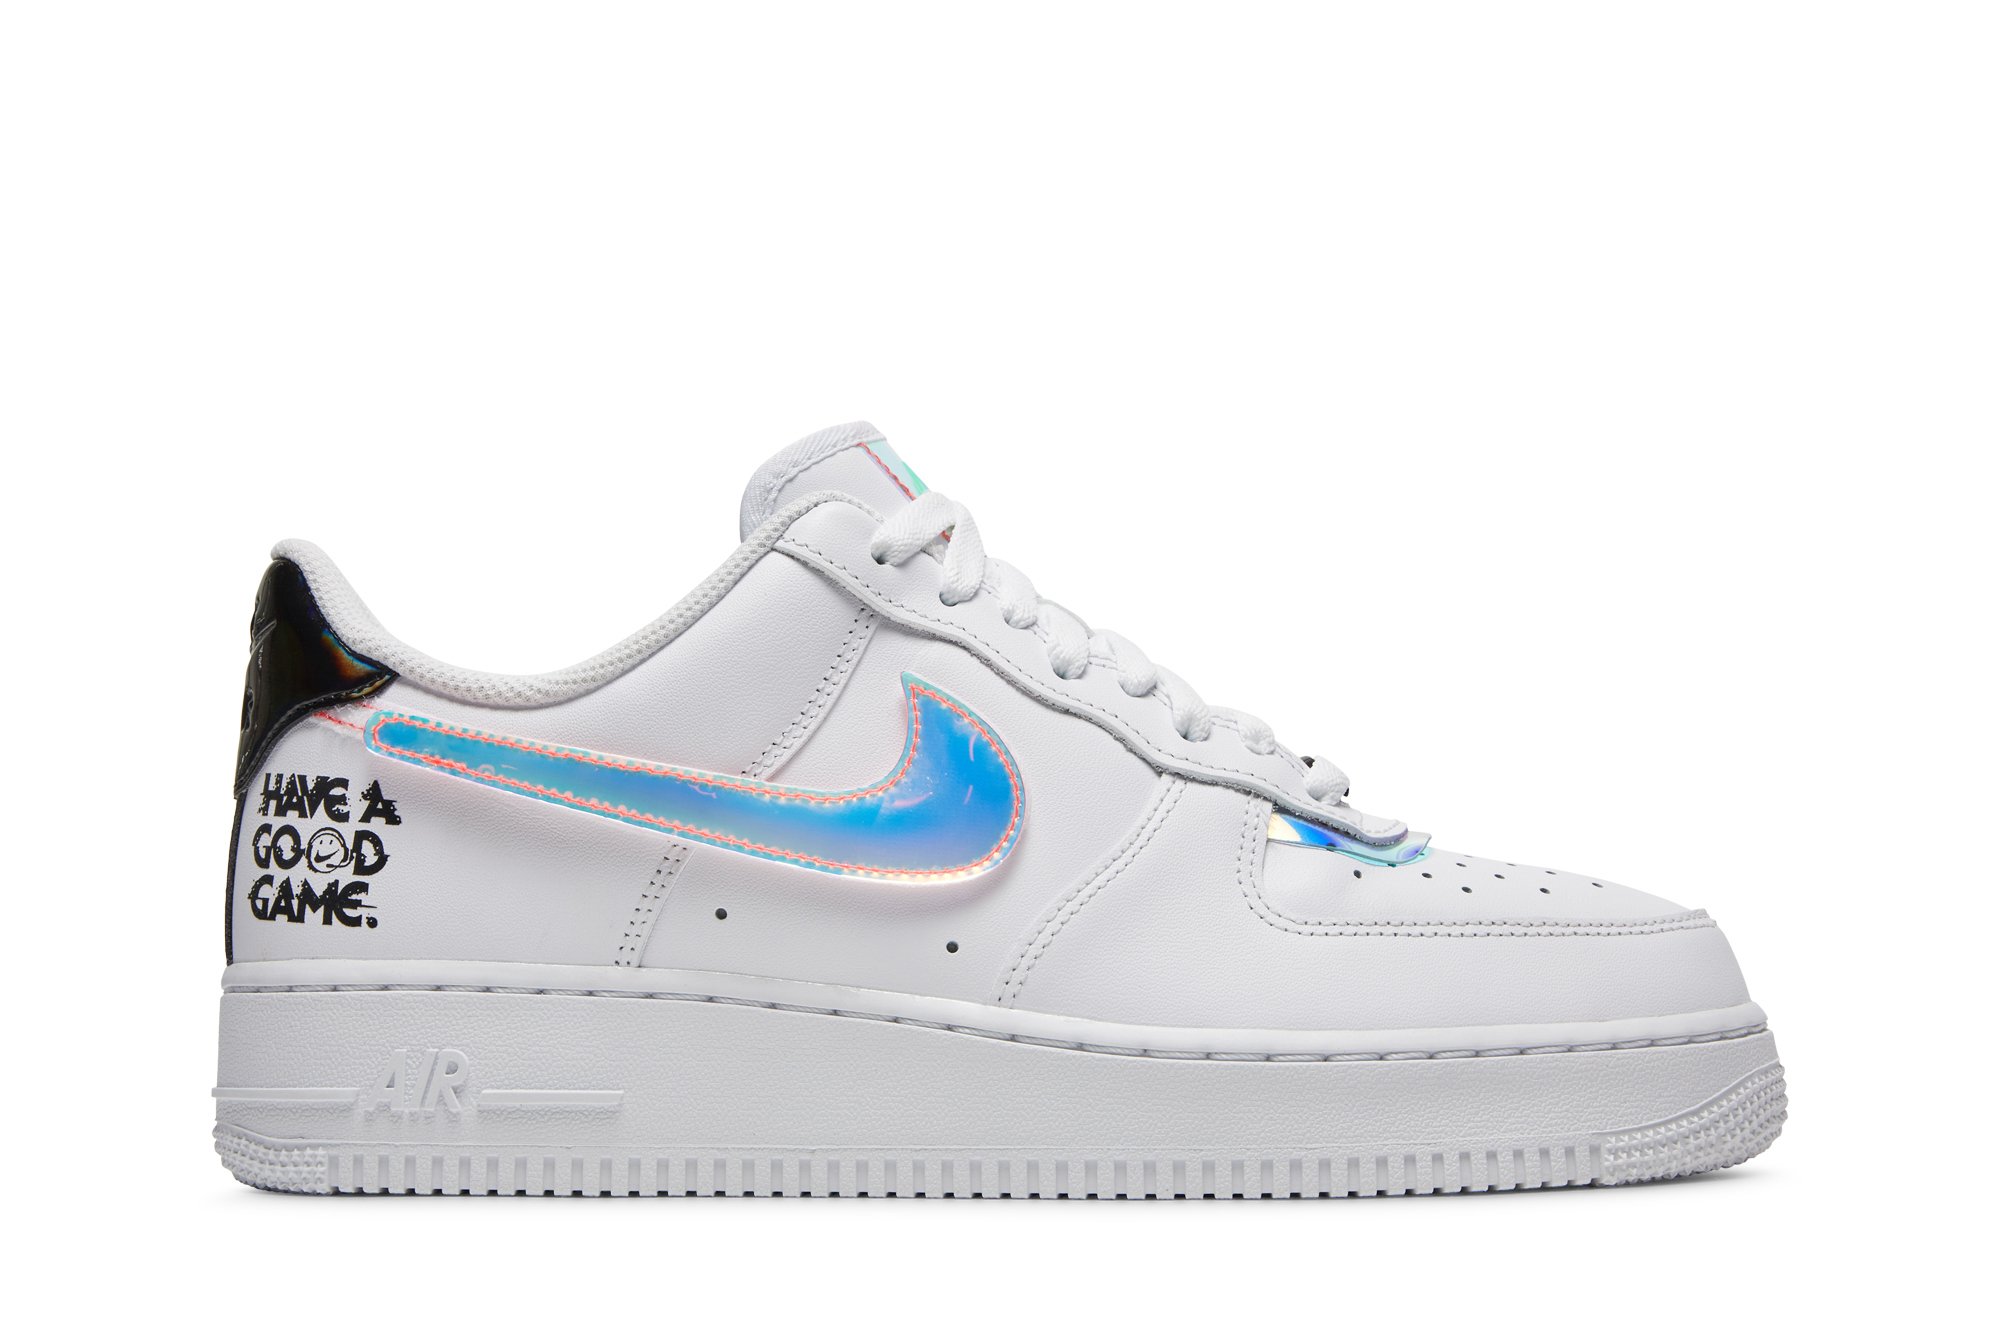 Air Force 1 '07 LV8 'Have a Good Game'